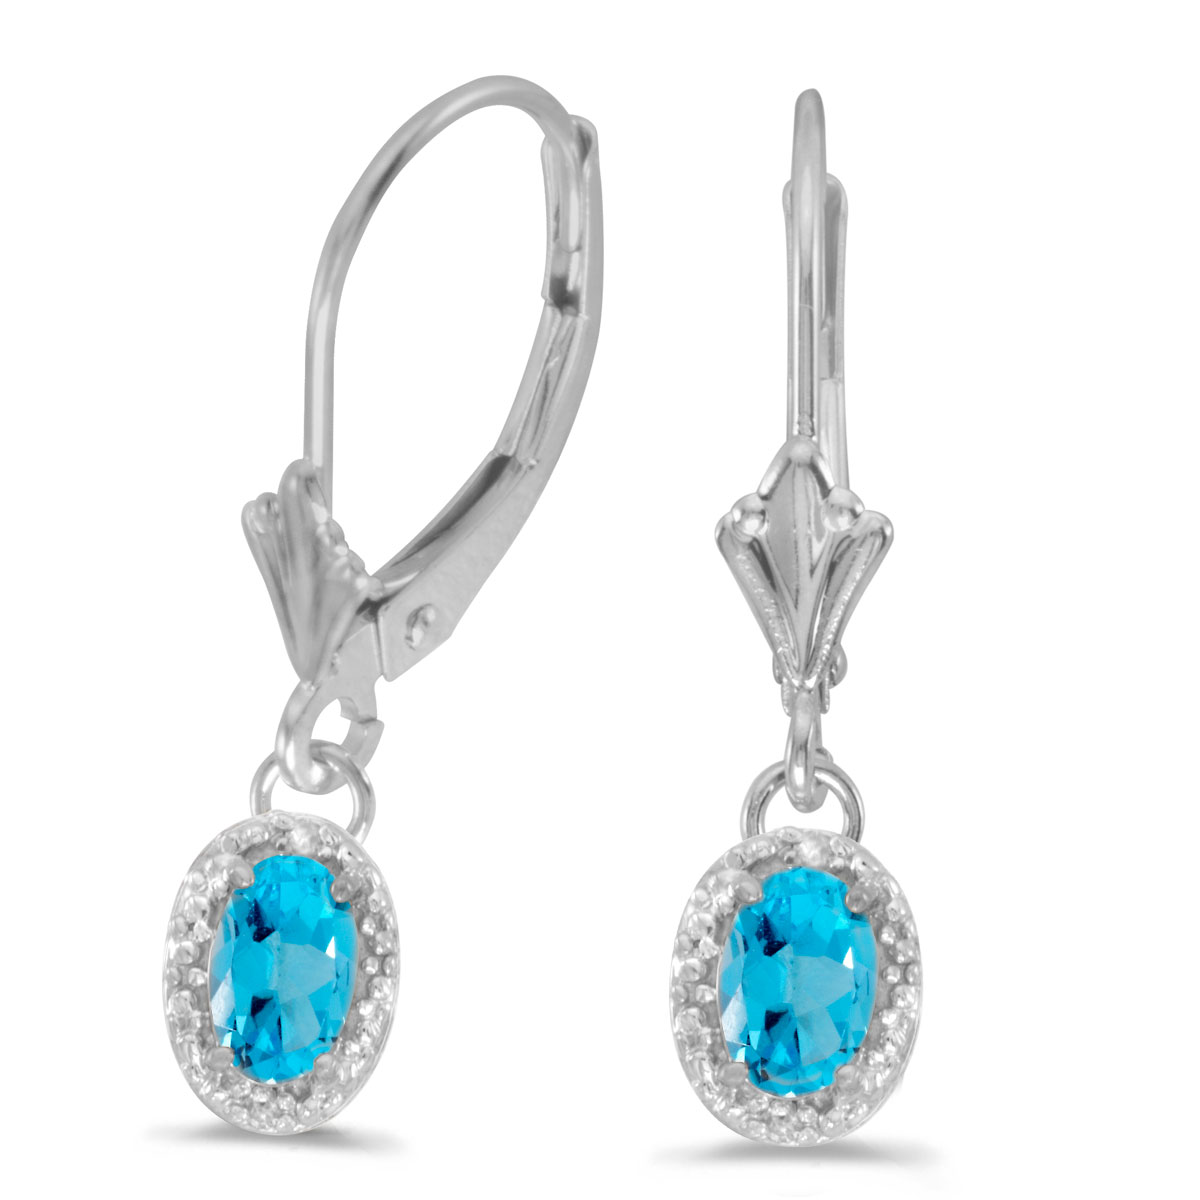 JCX2131: Beautiful 10k white gold leverback earrings with sophisticated 6x4 mm blue topaz stones complemented with bright diamonds.